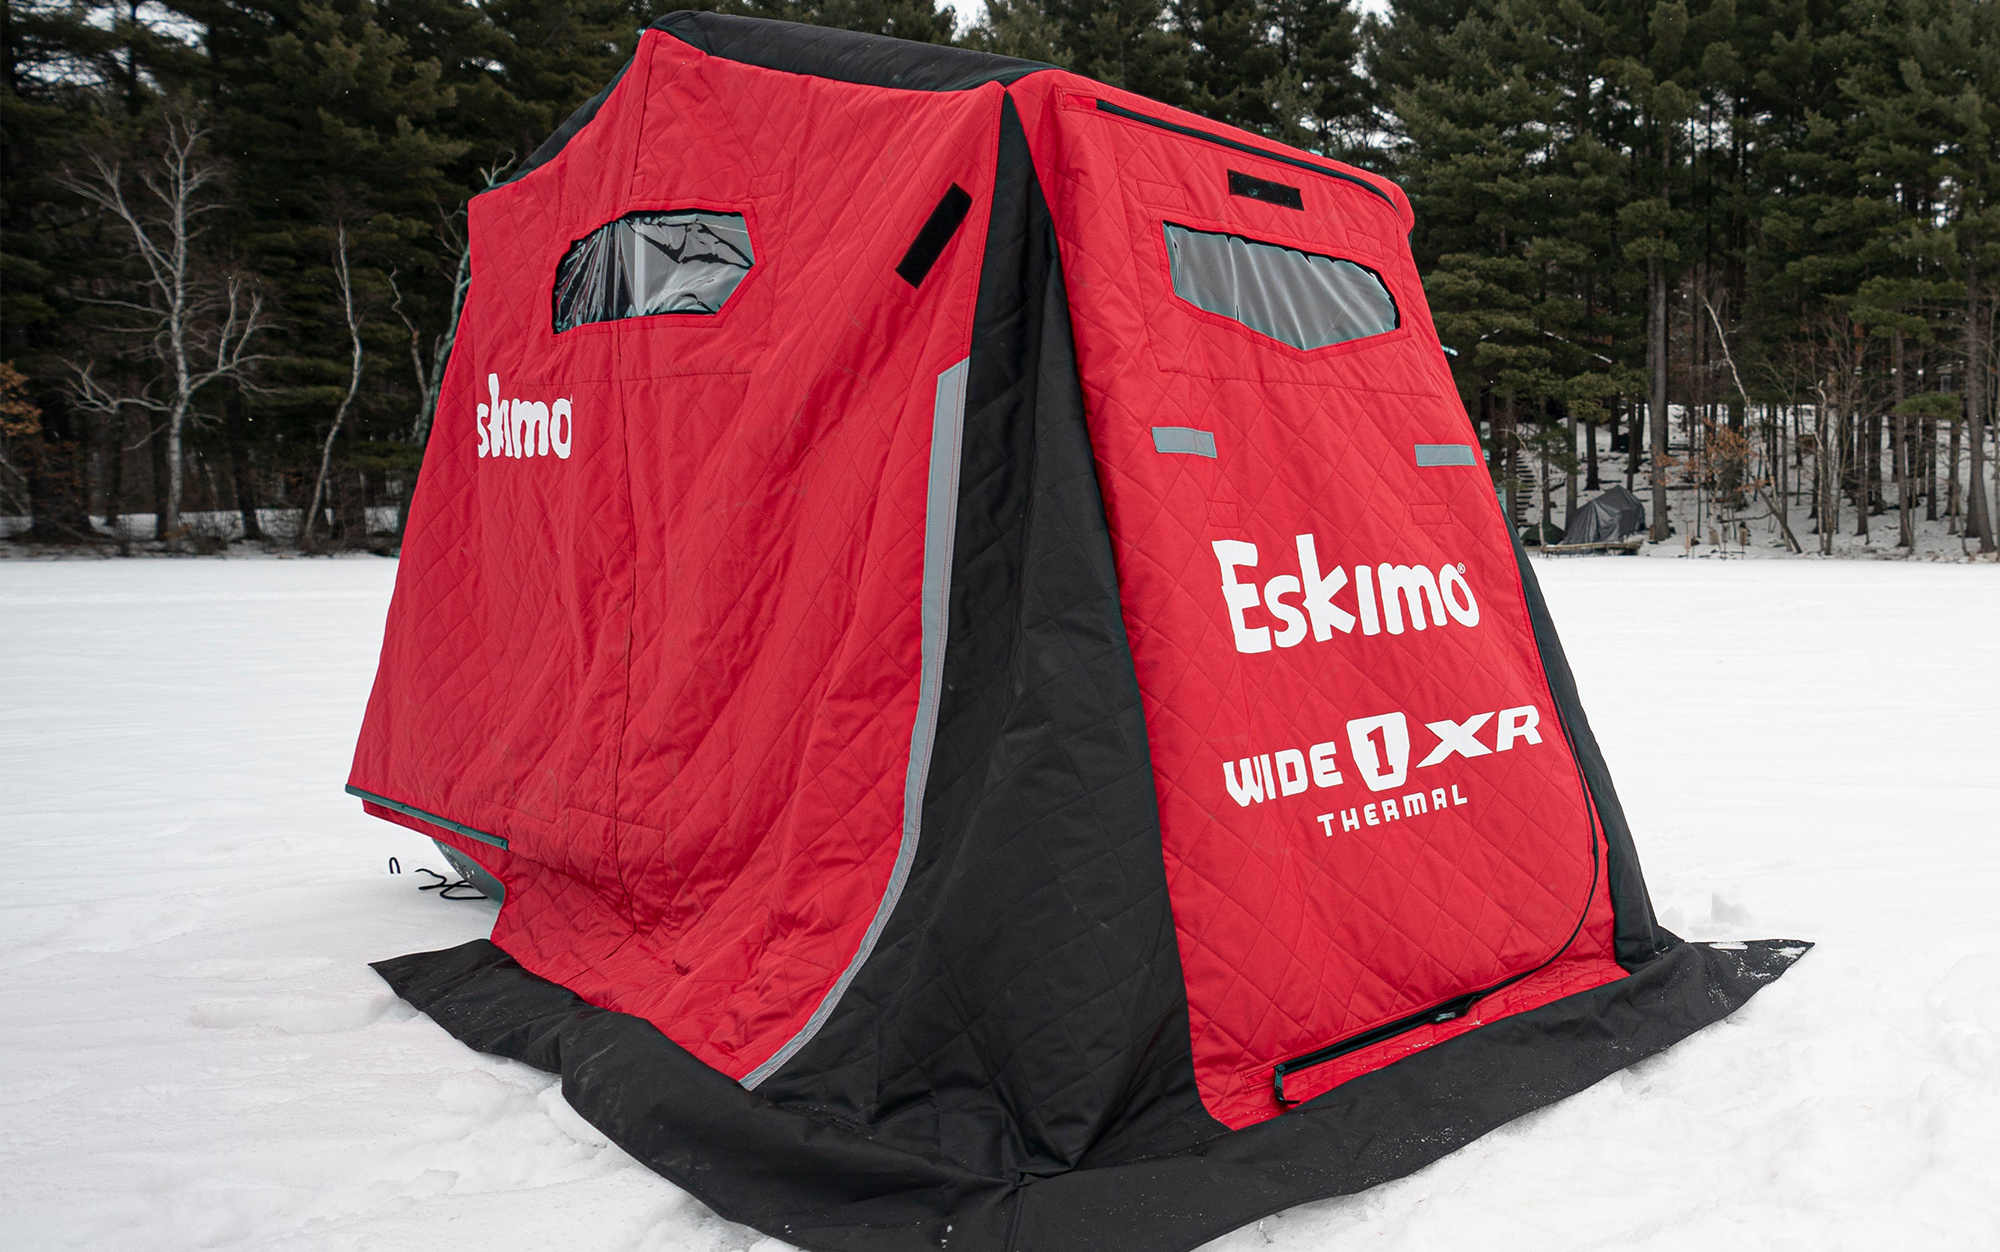 Lost Creek 6 Person Thermal Ice Fishing Tent Review (Is It Worth